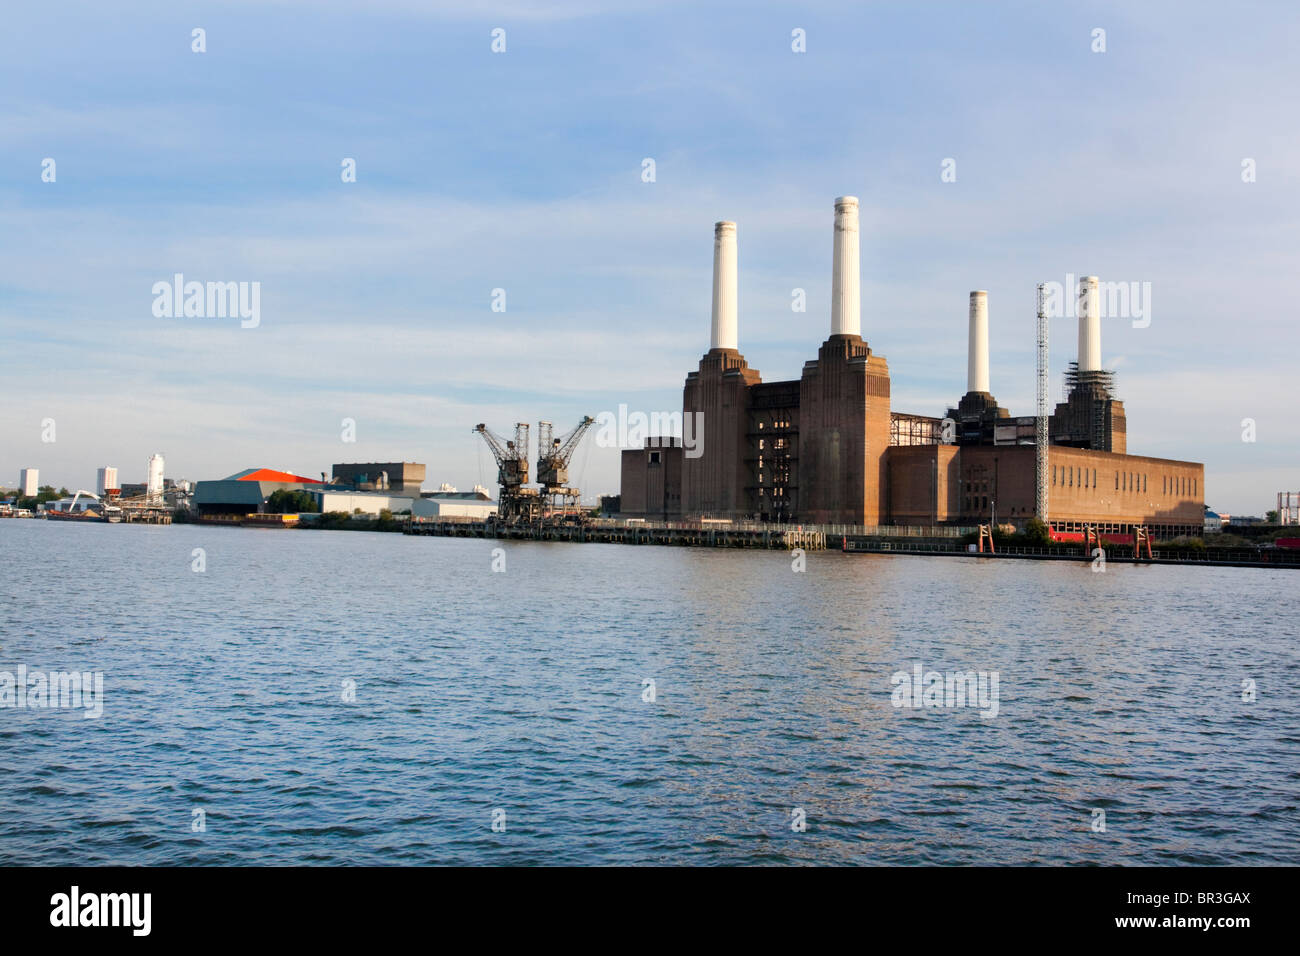 Battersea Power Station seen from across the River Thames, London, England, UK. Stock Photo